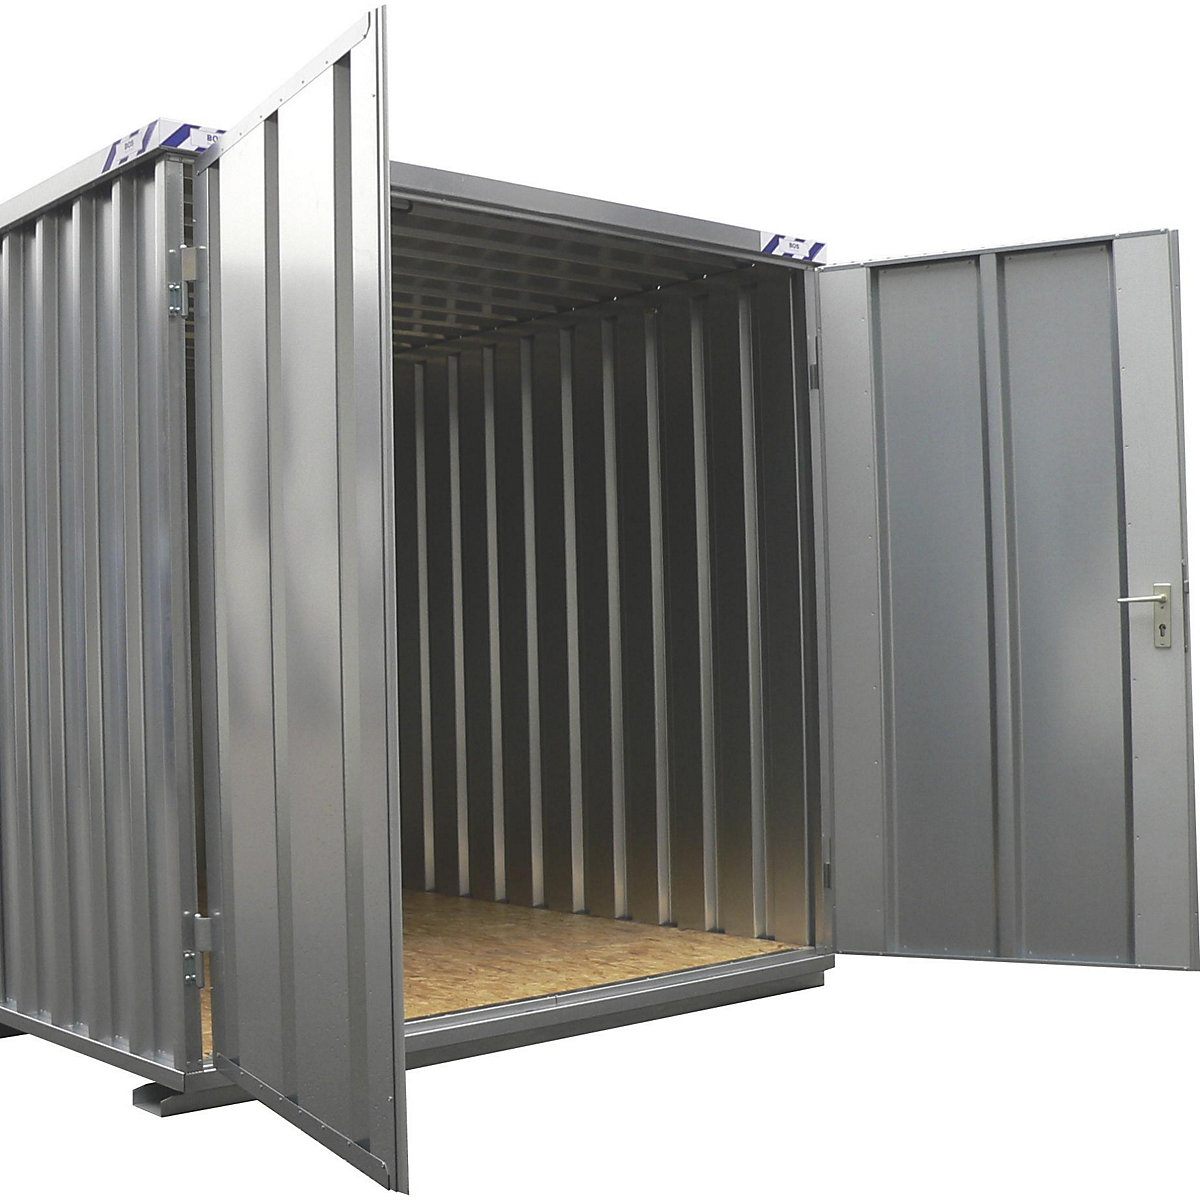 Doors for storage container